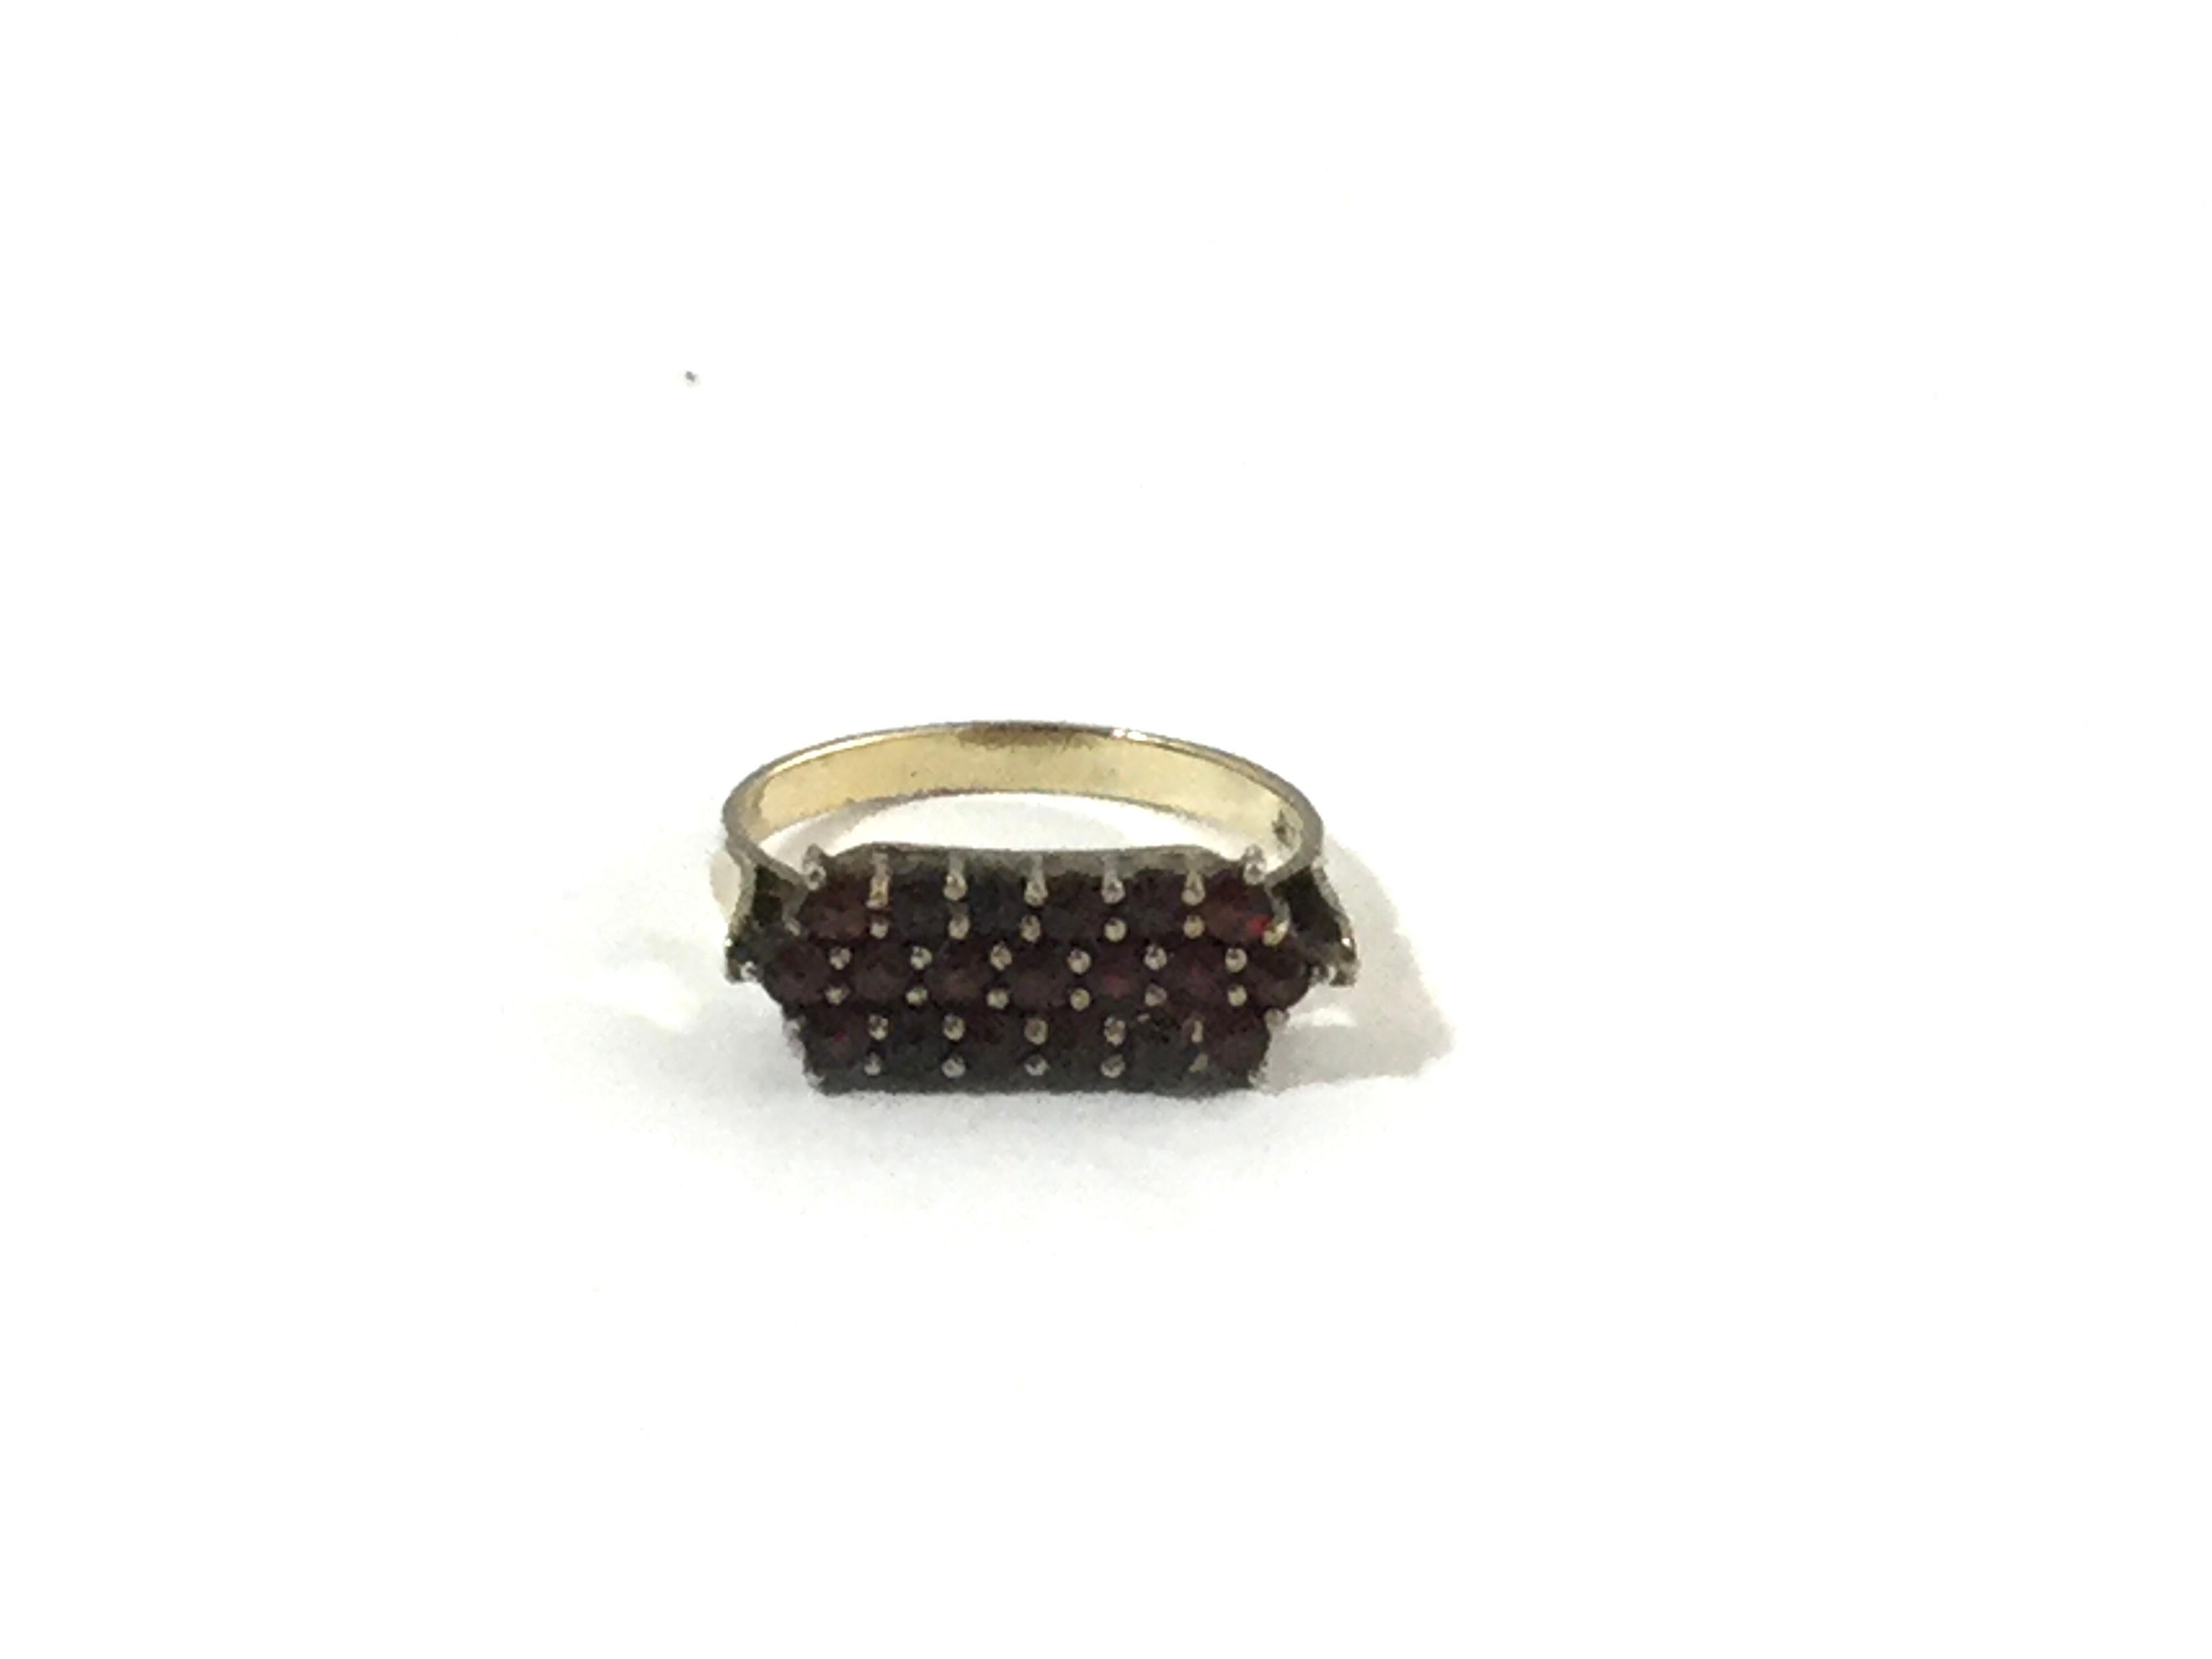 Bohemian Garnet Sterling Silver Ring

This is a lovely sterling silver garnet Bohemian Ring with a gold wash.

Measurements: Size 6 3/4. Front of ring measures 5mmL x 17mmW. Shank measures 1mm. Ring sits 2mm high off the finger.

Weight: 2.4 g / 1.5